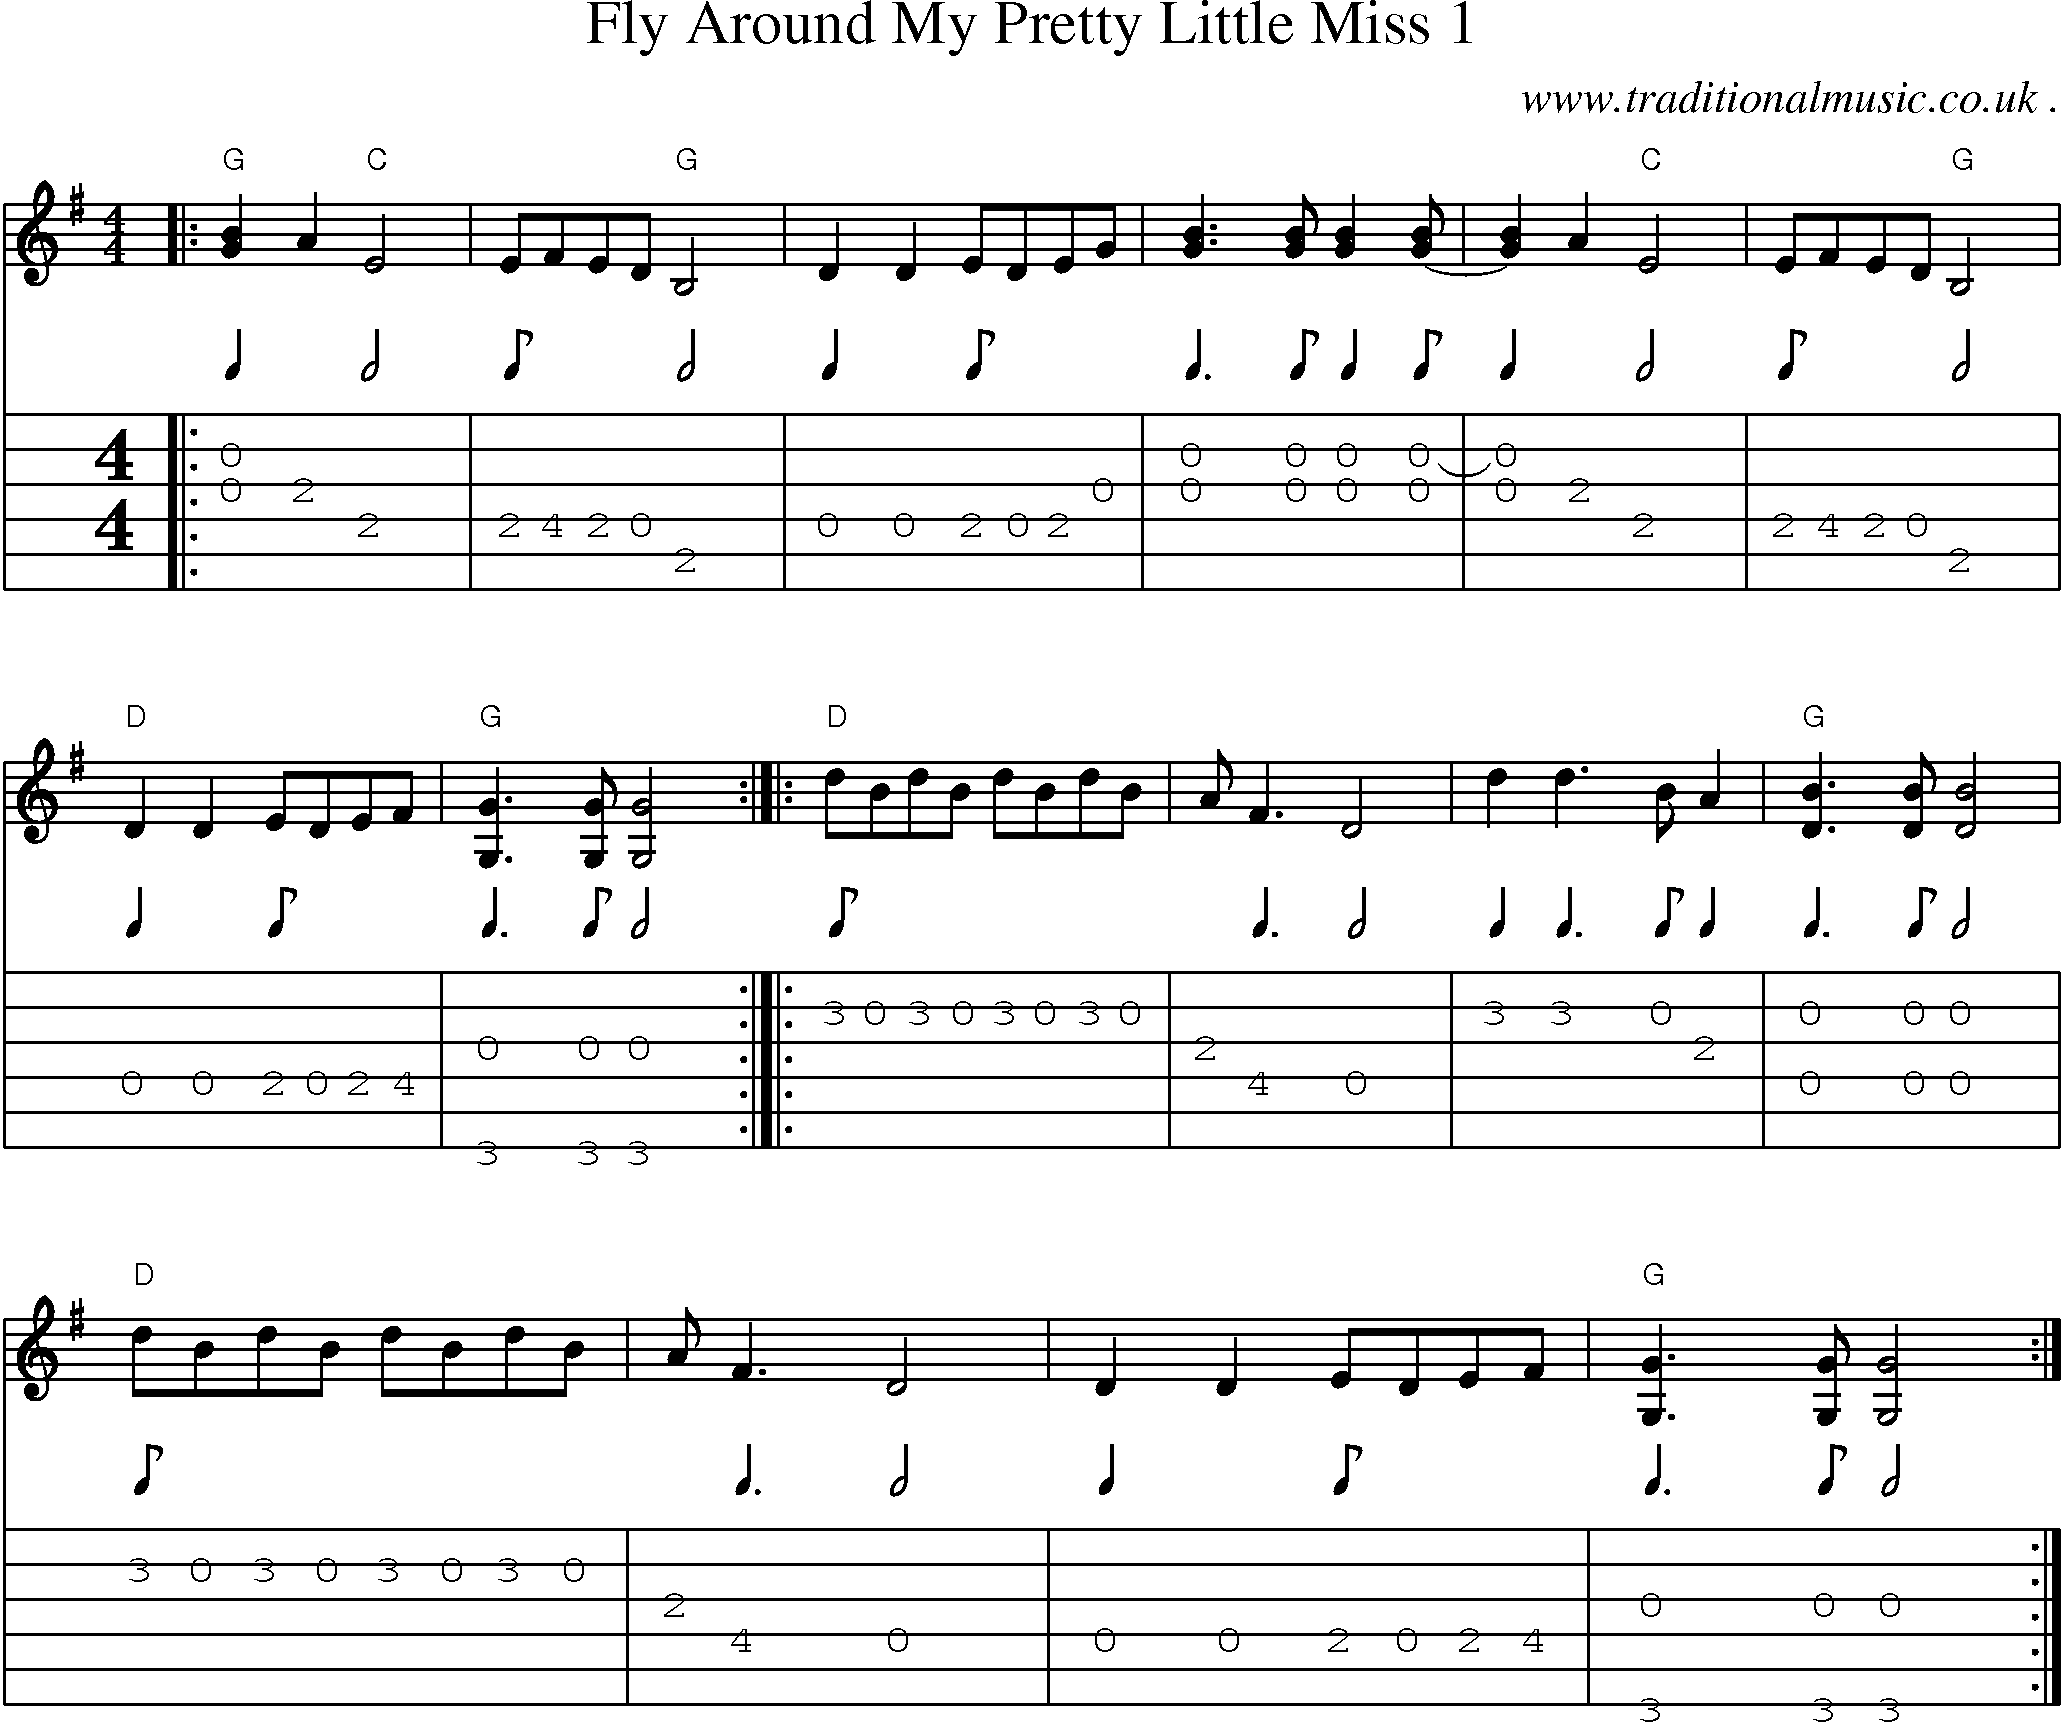 Music Score and Guitar Tabs for Fly Around My Pretty Little Miss 1